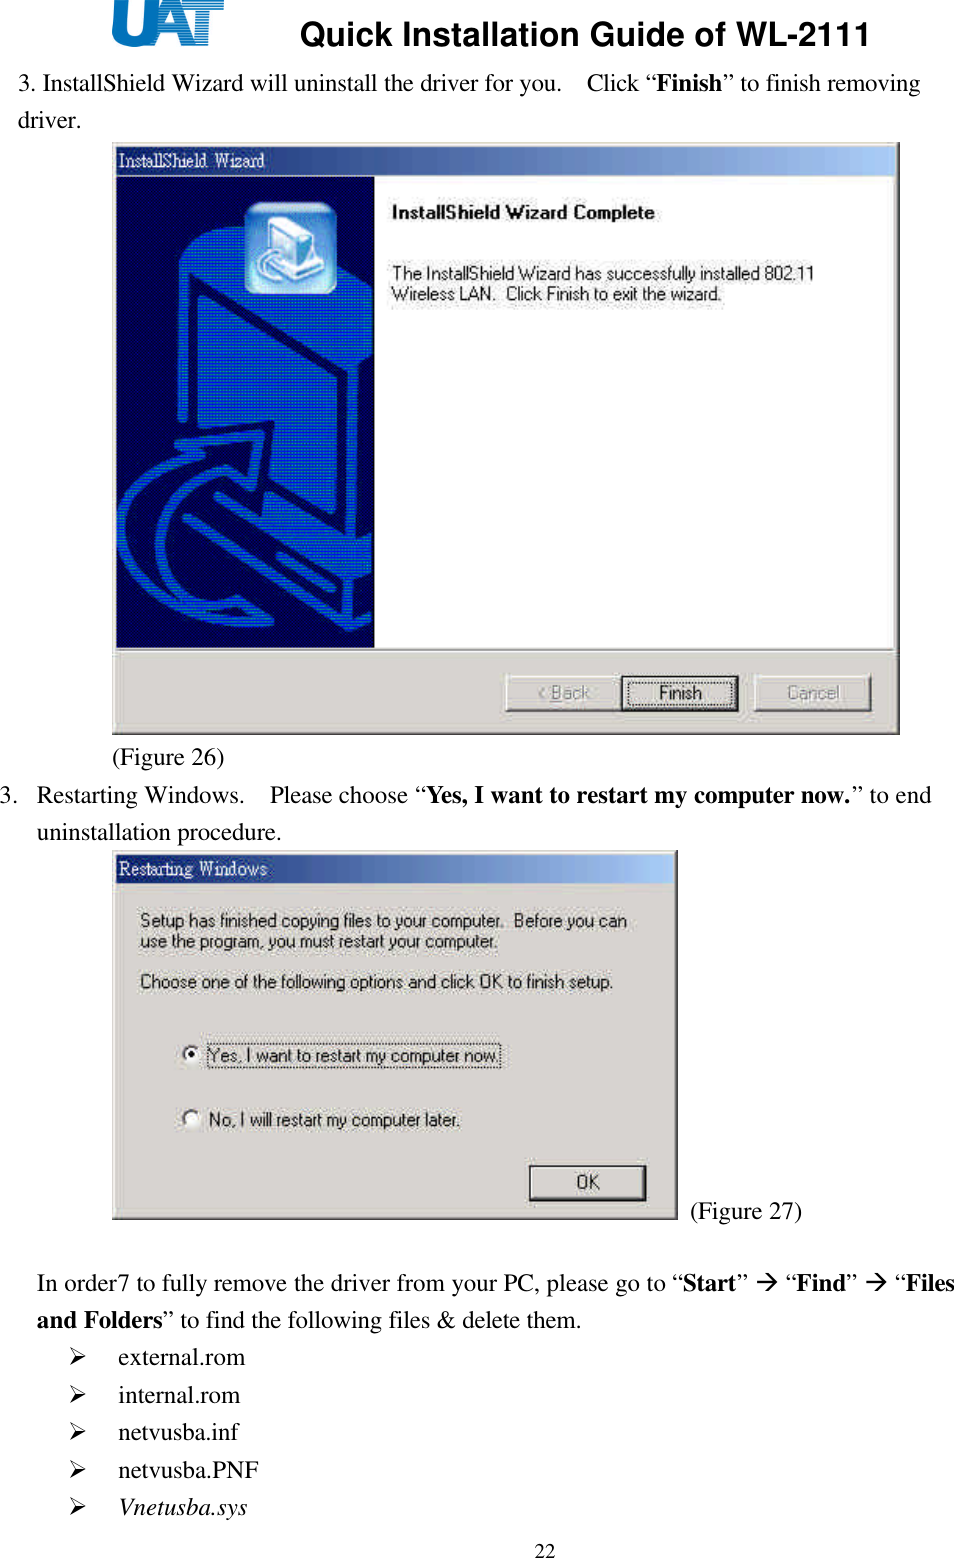     Quick Installation Guide of WL-2111    223. InstallShield Wizard will uninstall the driver for you.  Click “Finish” to finish removing driver.    (Figure 26)   3. Restarting Windows.  Please choose “Yes, I want to restart my computer now.” to end uninstallation procedure.  (Figure 27)    In order7 to fully remove the driver from your PC, please go to “Start” à “Find” à “Files and Folders” to find the following files &amp; delete them. Ø external.rom Ø internal.rom Ø netvusba.inf Ø netvusba.PNF Ø Vnetusba.sys 